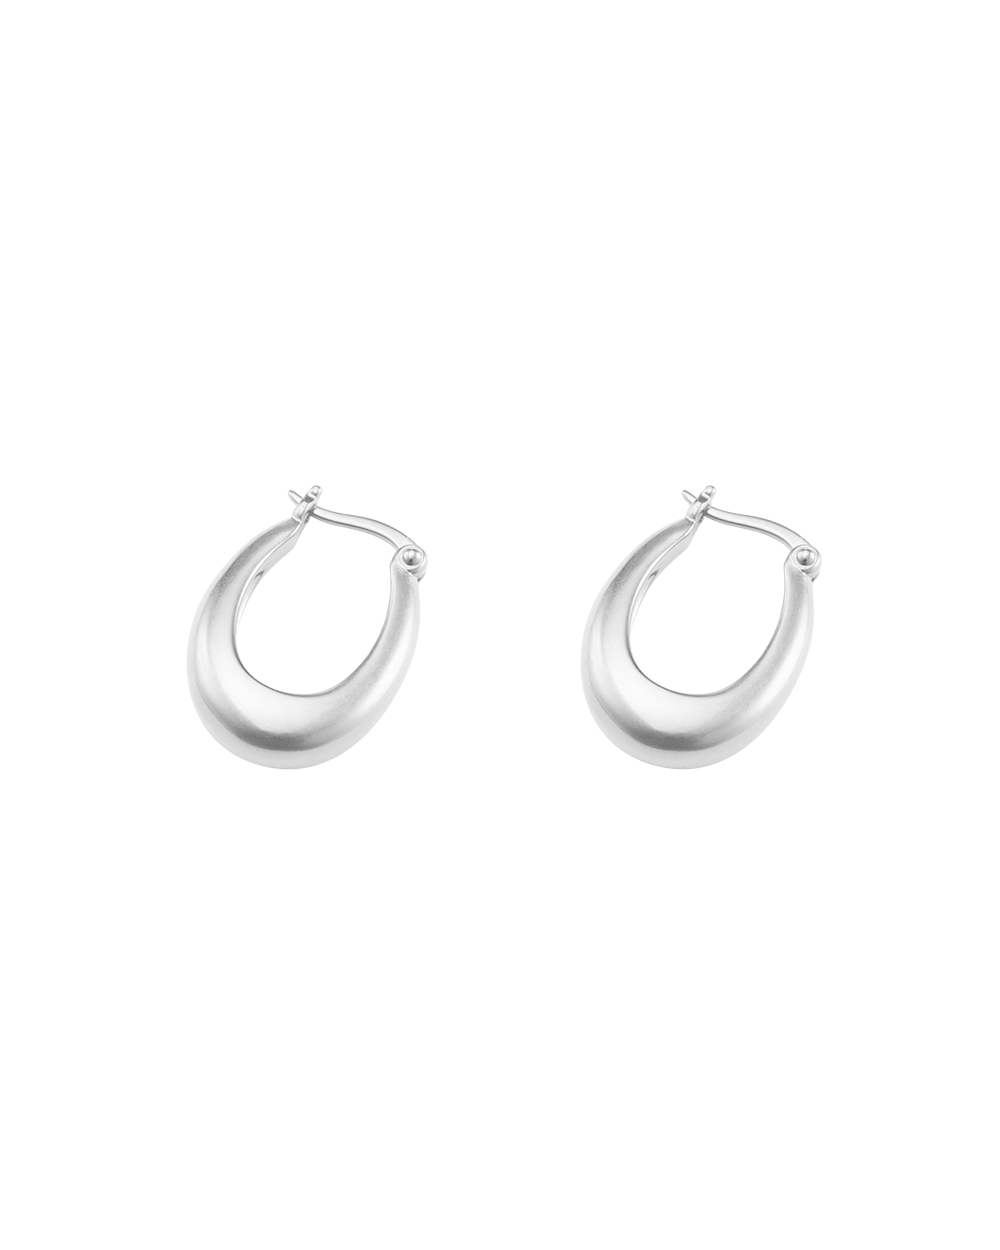 CENTRA HOOPS (STERLING SILVER)